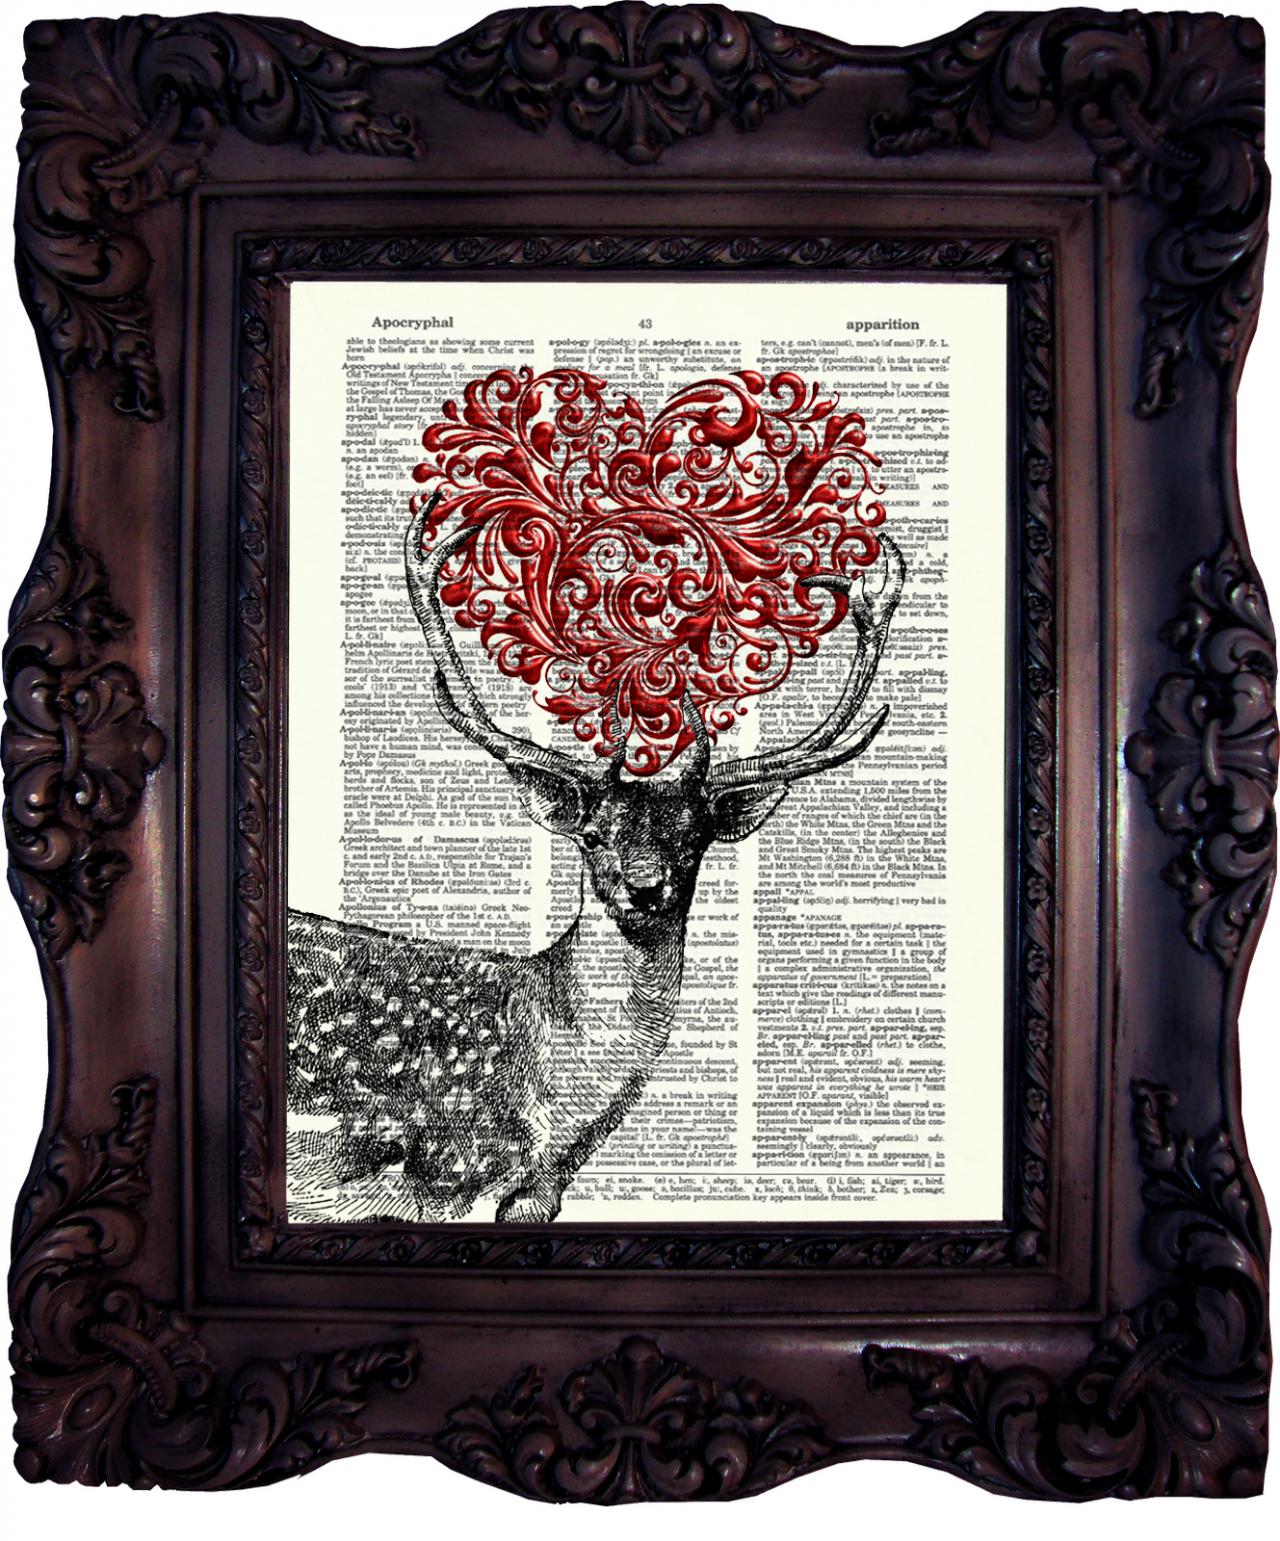 Deer And Heart. Dictionary Art Print. Vintage Art Print On Book Page. Deer Art Print. Wall Art. Decor. Love. Dictionary Print. Code:510